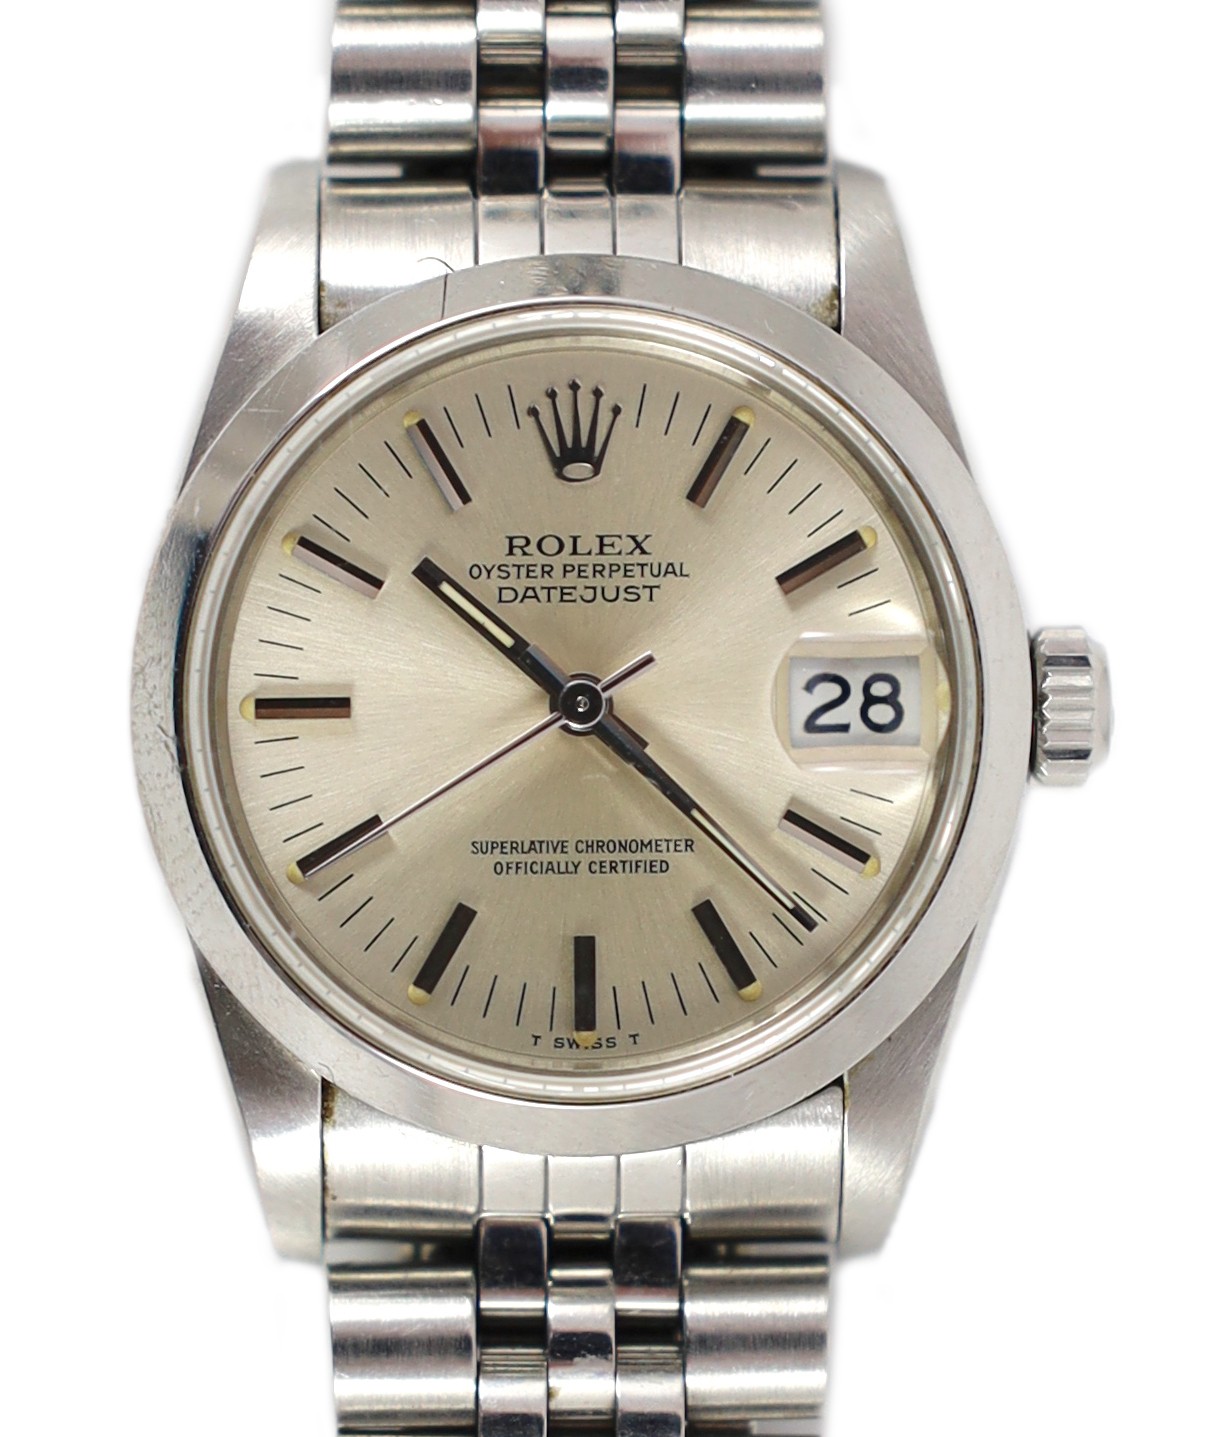 A gentleman's 1980's stainless steel mid-size Rolex Oyster Perpetual Datejust